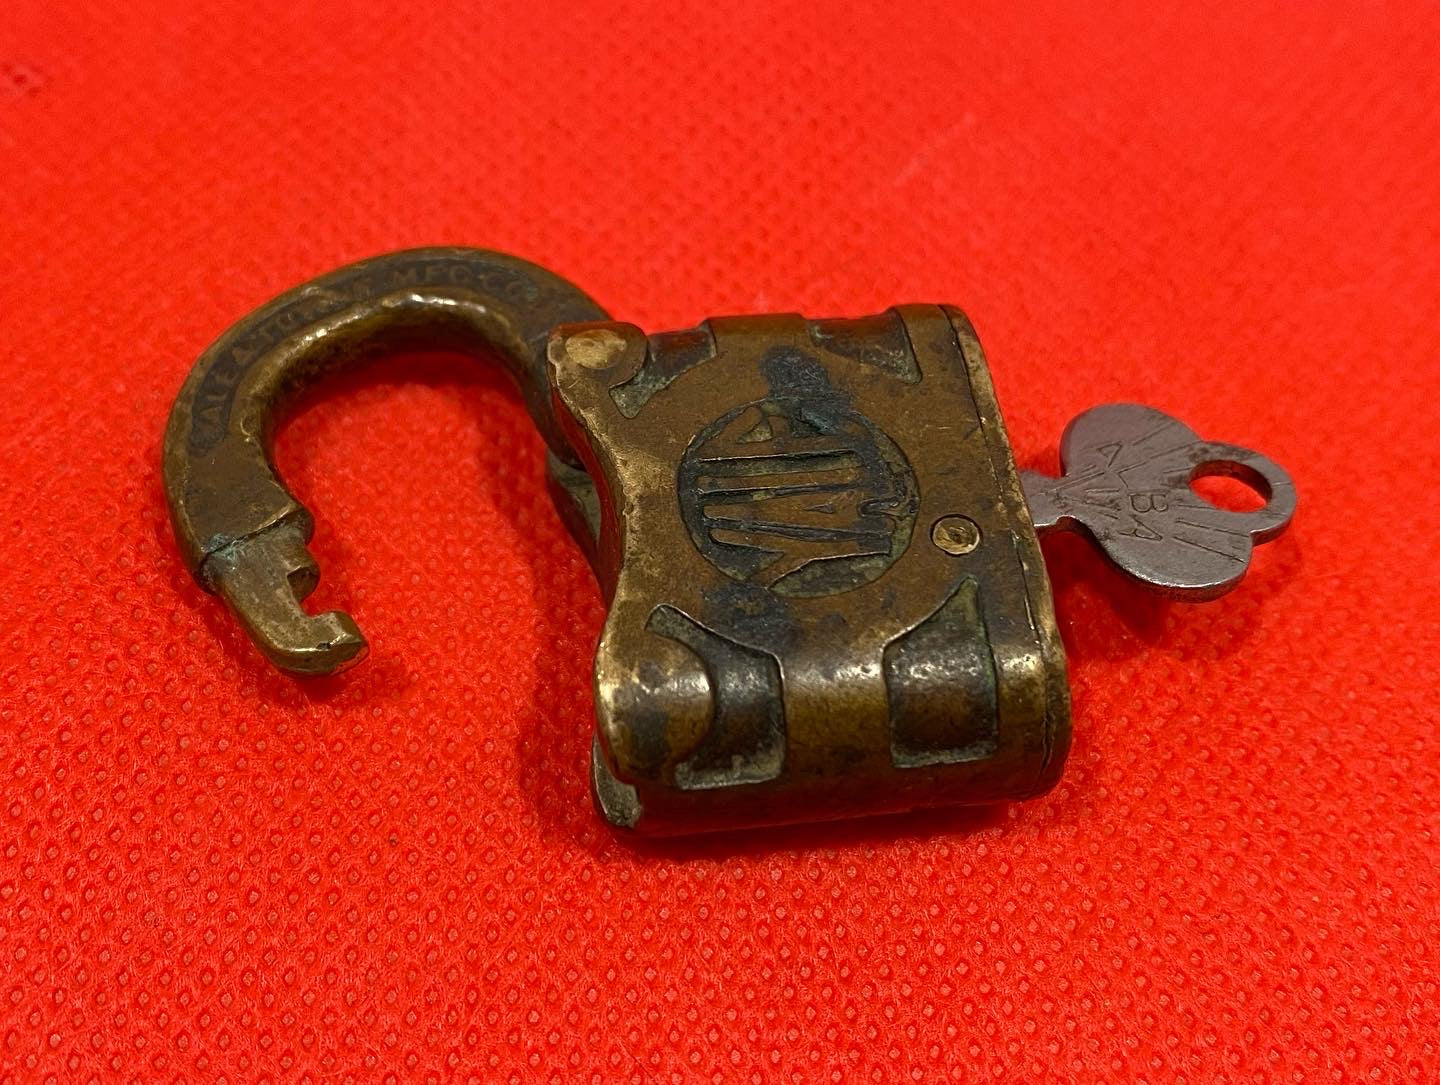 Antique  padlock Yale & Towne Mfg. Co. Stamford Conn. U.S.A.  With key. 1930s